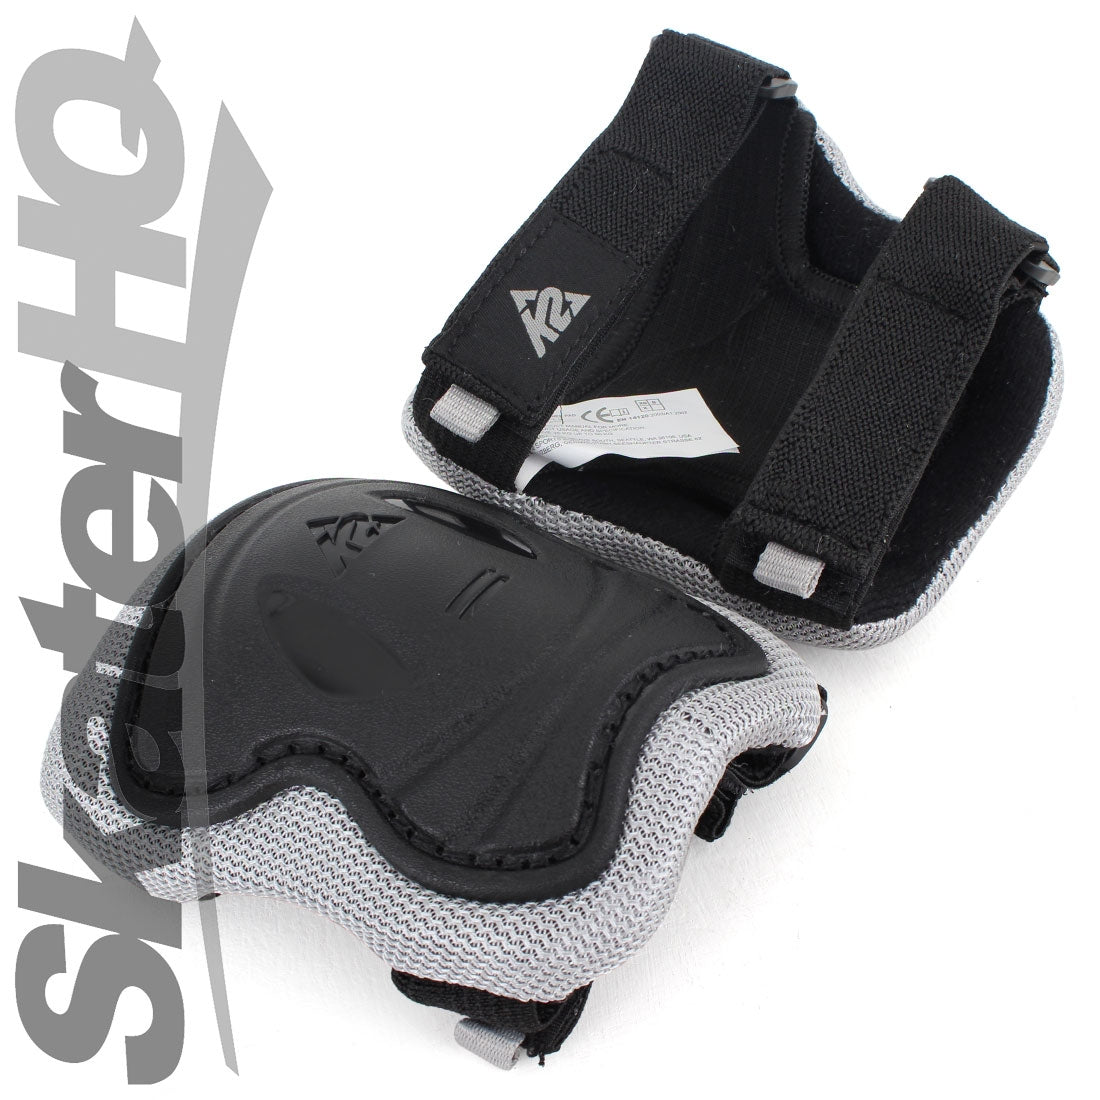 K2 Junior Tri Pack - XSmall Protective Gear